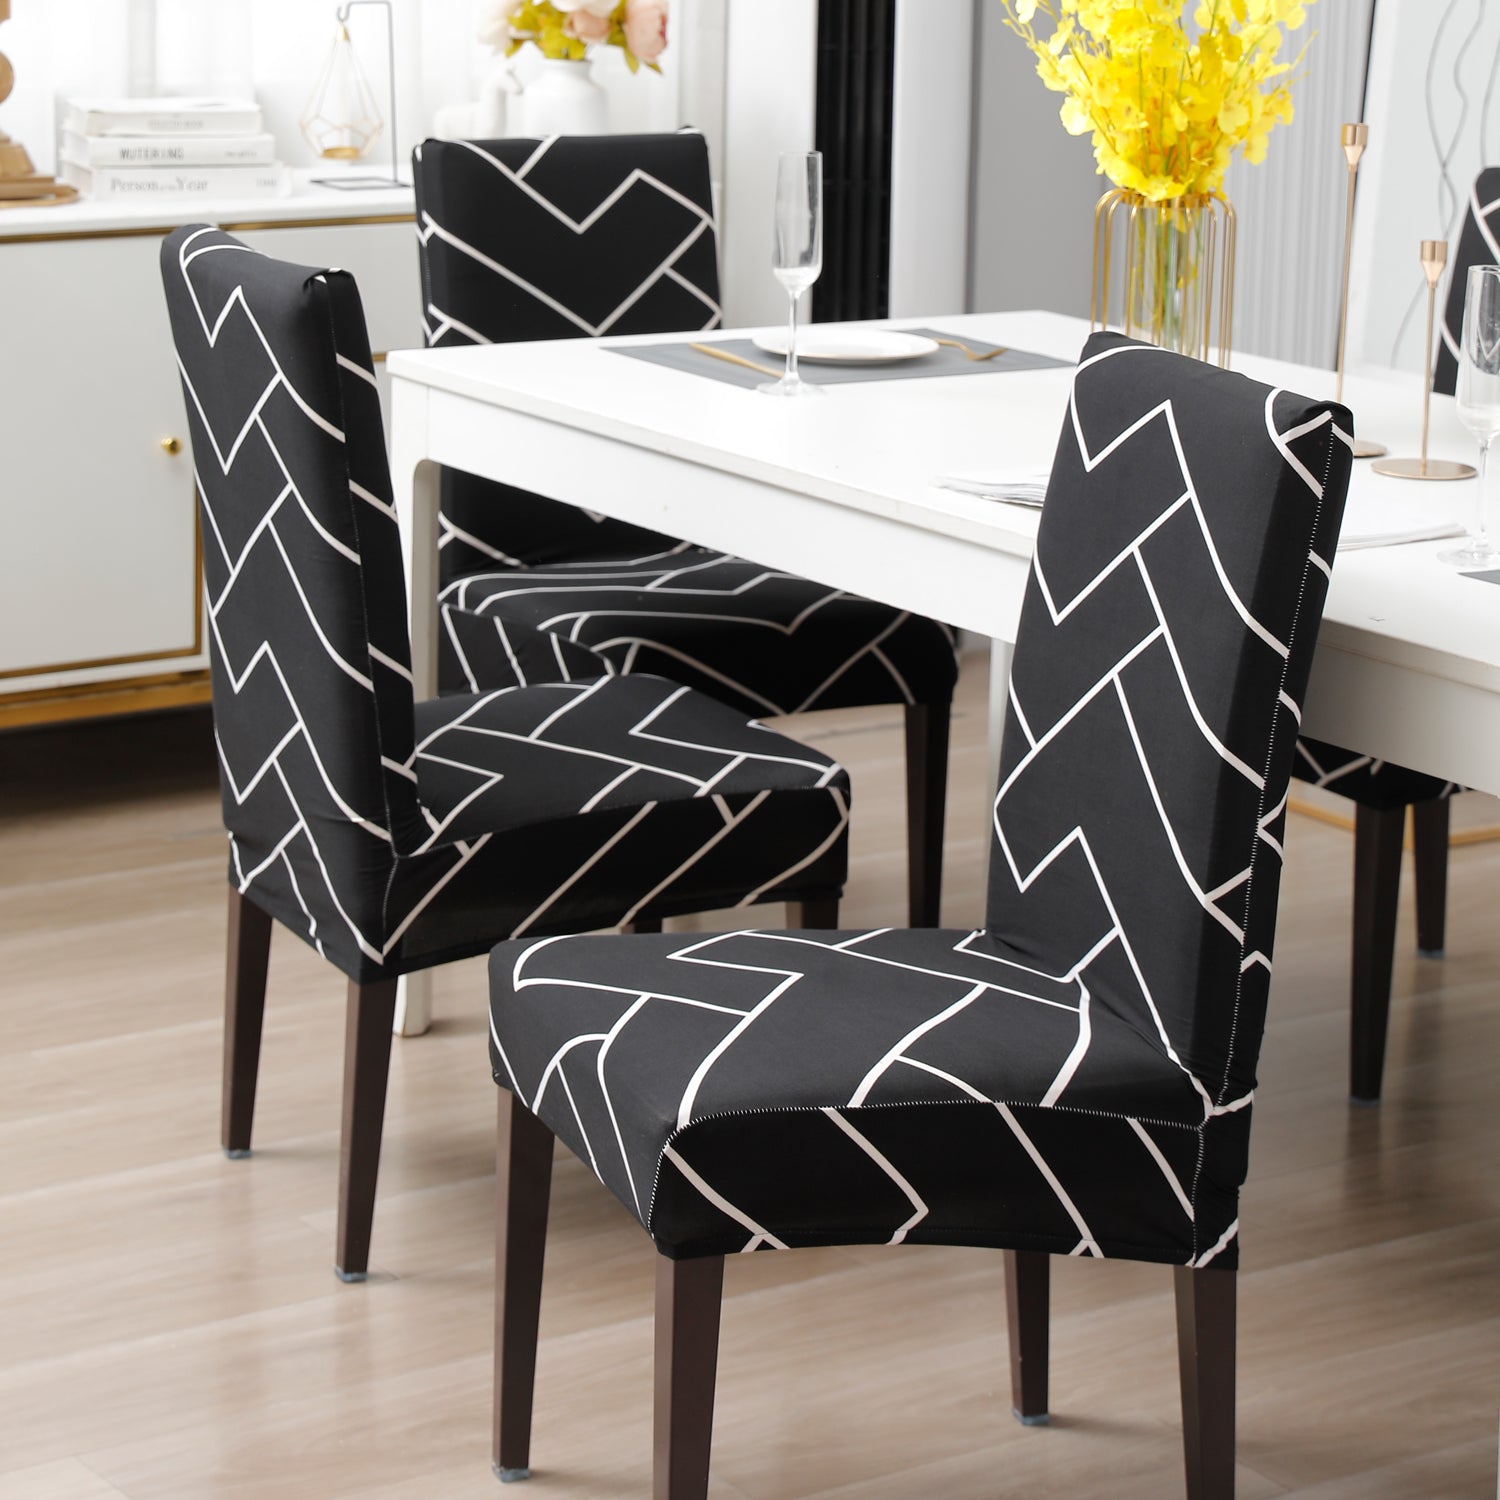 Elastic Stretchable Dining Chair Cover, Black Chevron